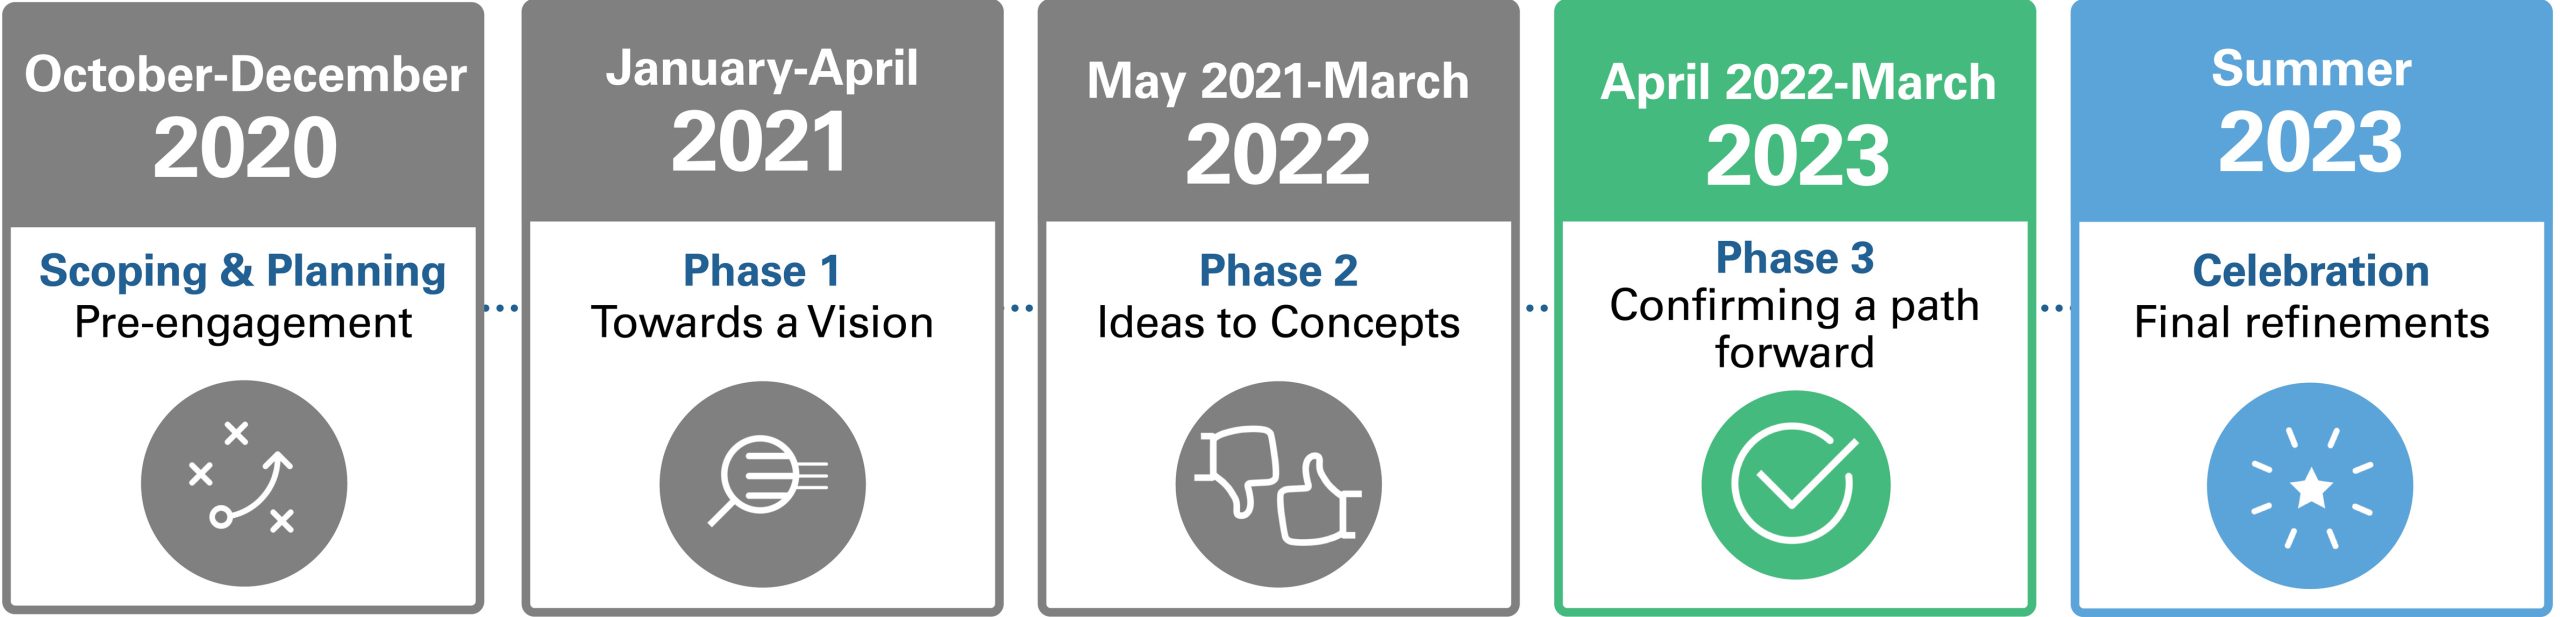 Five boxes depicting the timeline. From left to right: October to December 2020: Scoping and Planning, pre-engagement (colour, grey); January to April 2021: Phase 1, towards a vision (colour, grey); May 2021 to March 2022: Phase 2, ideas to concepts (colour, grey); April 2022 to March 2023: Phase 3, confirming a path forward (colour, green); August to October 2022: Celebration, final refinements (colour, blue)